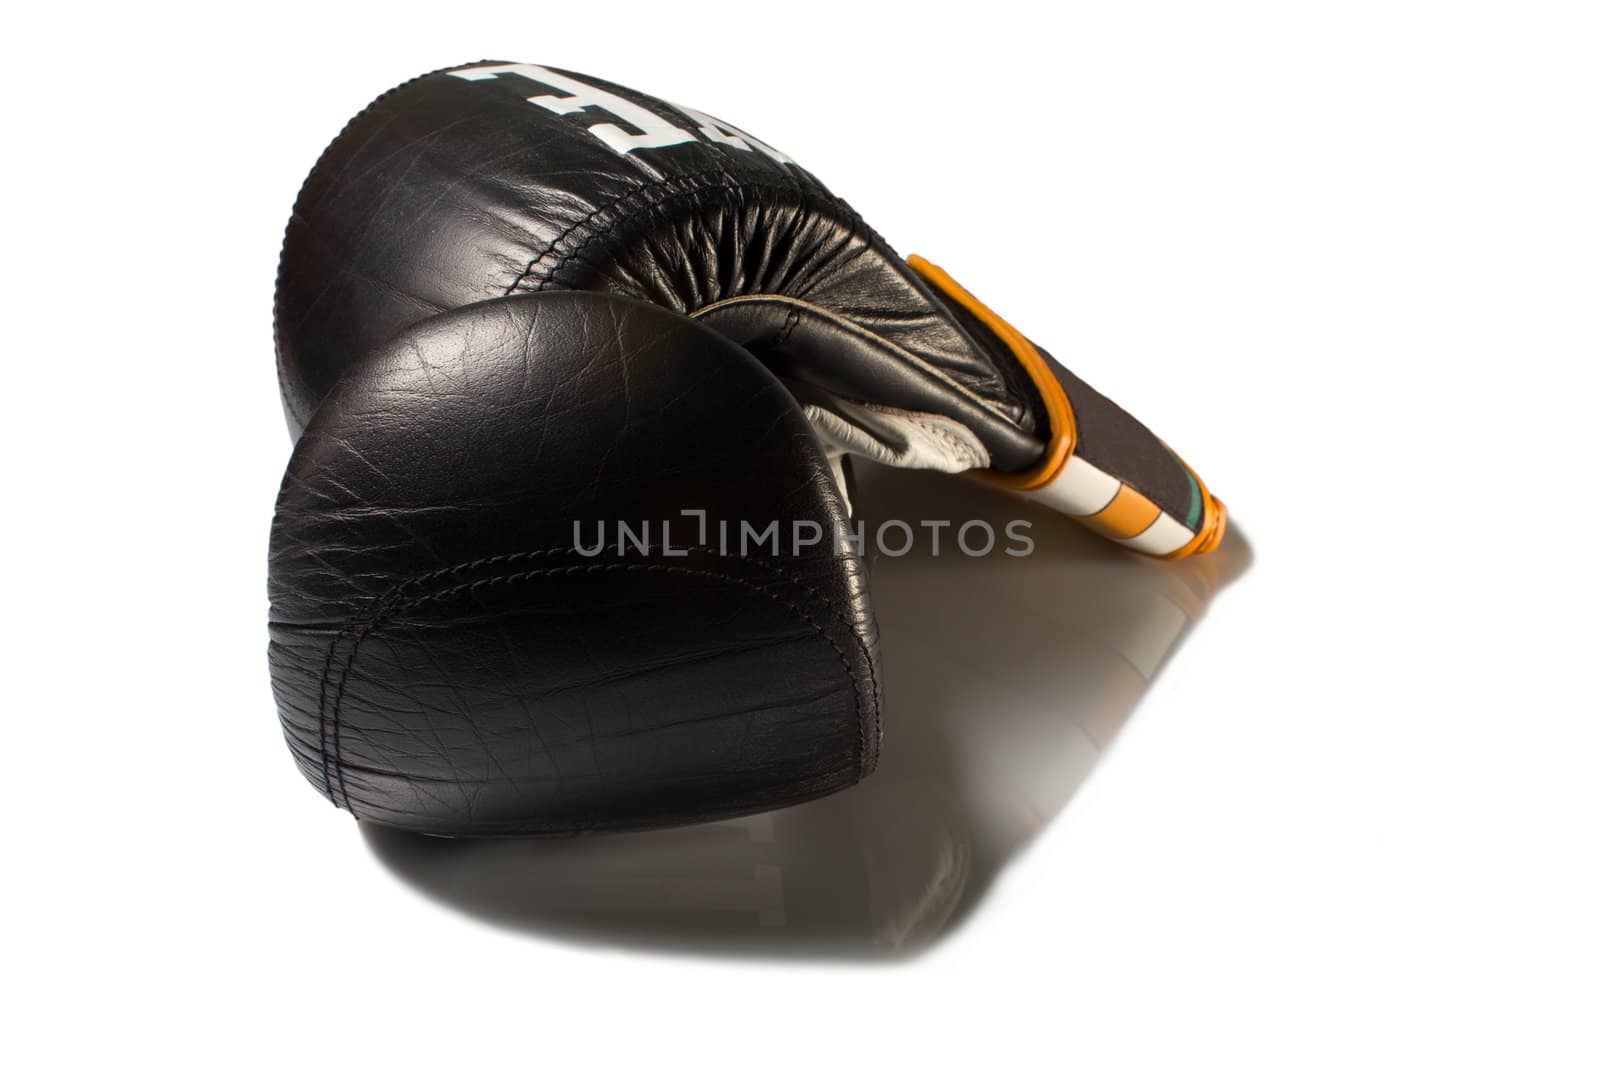 Boxing gloves on a neutral background